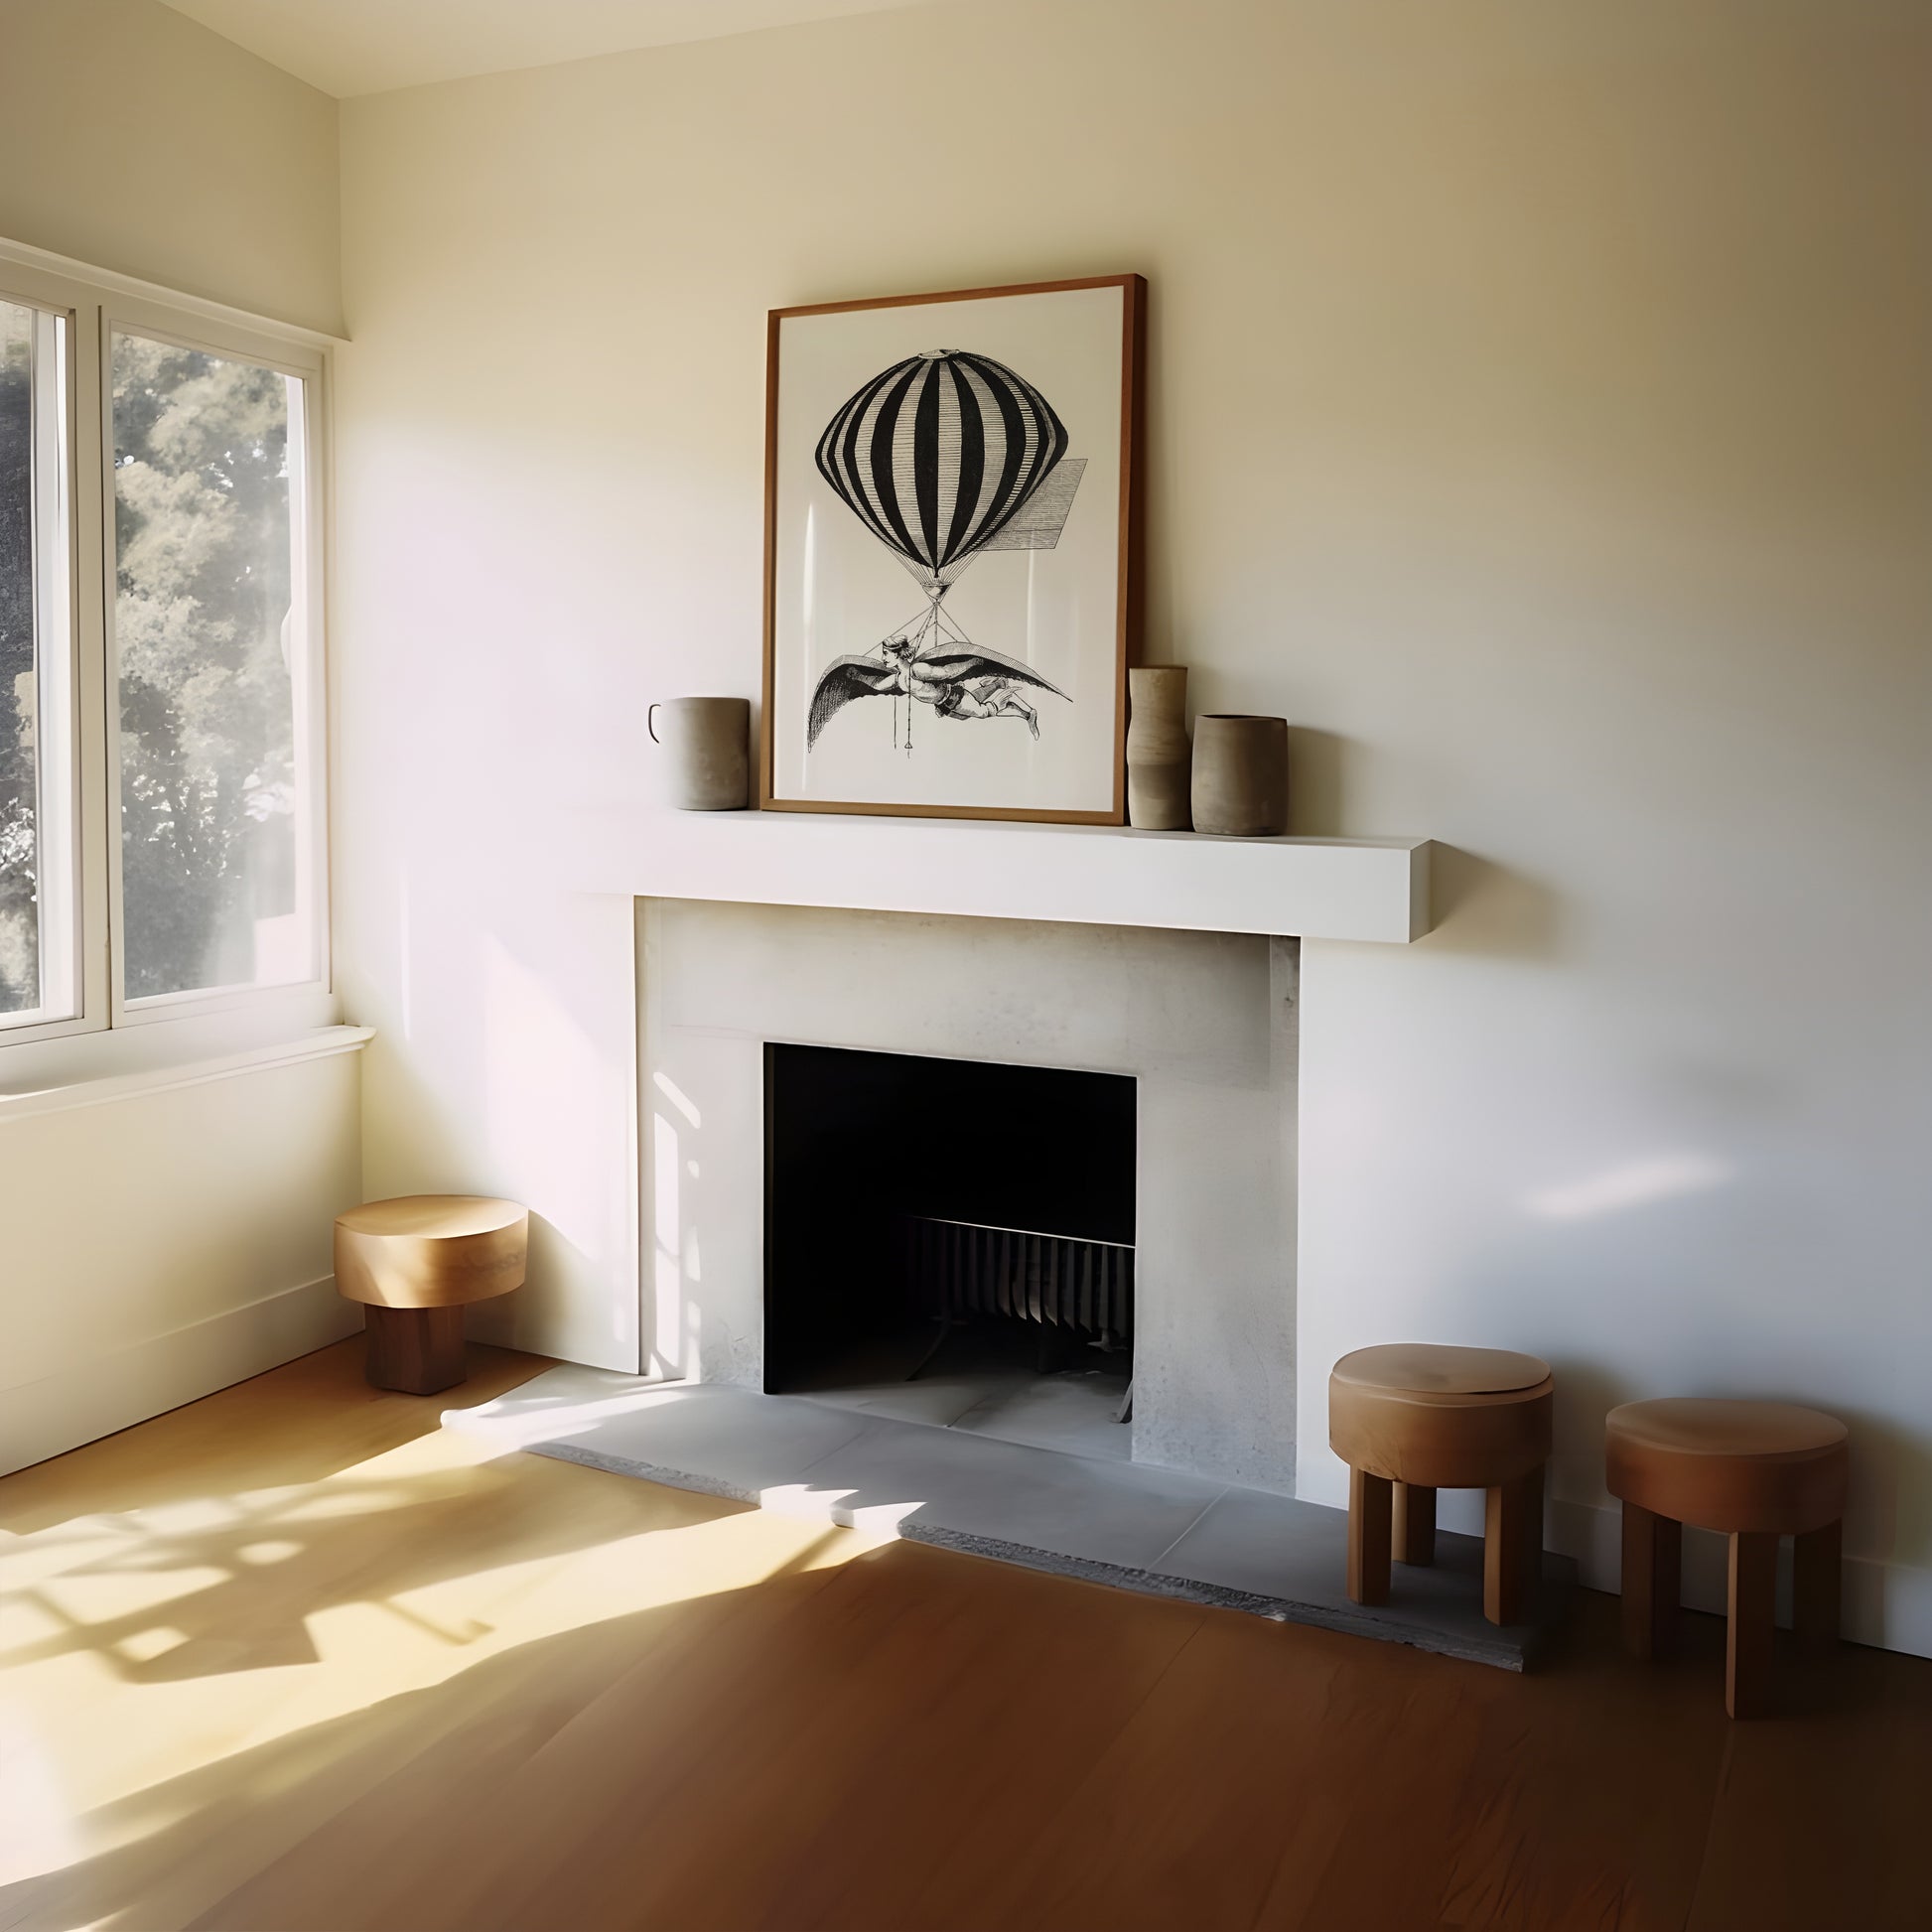 a picture of a hot air balloon above a fireplace